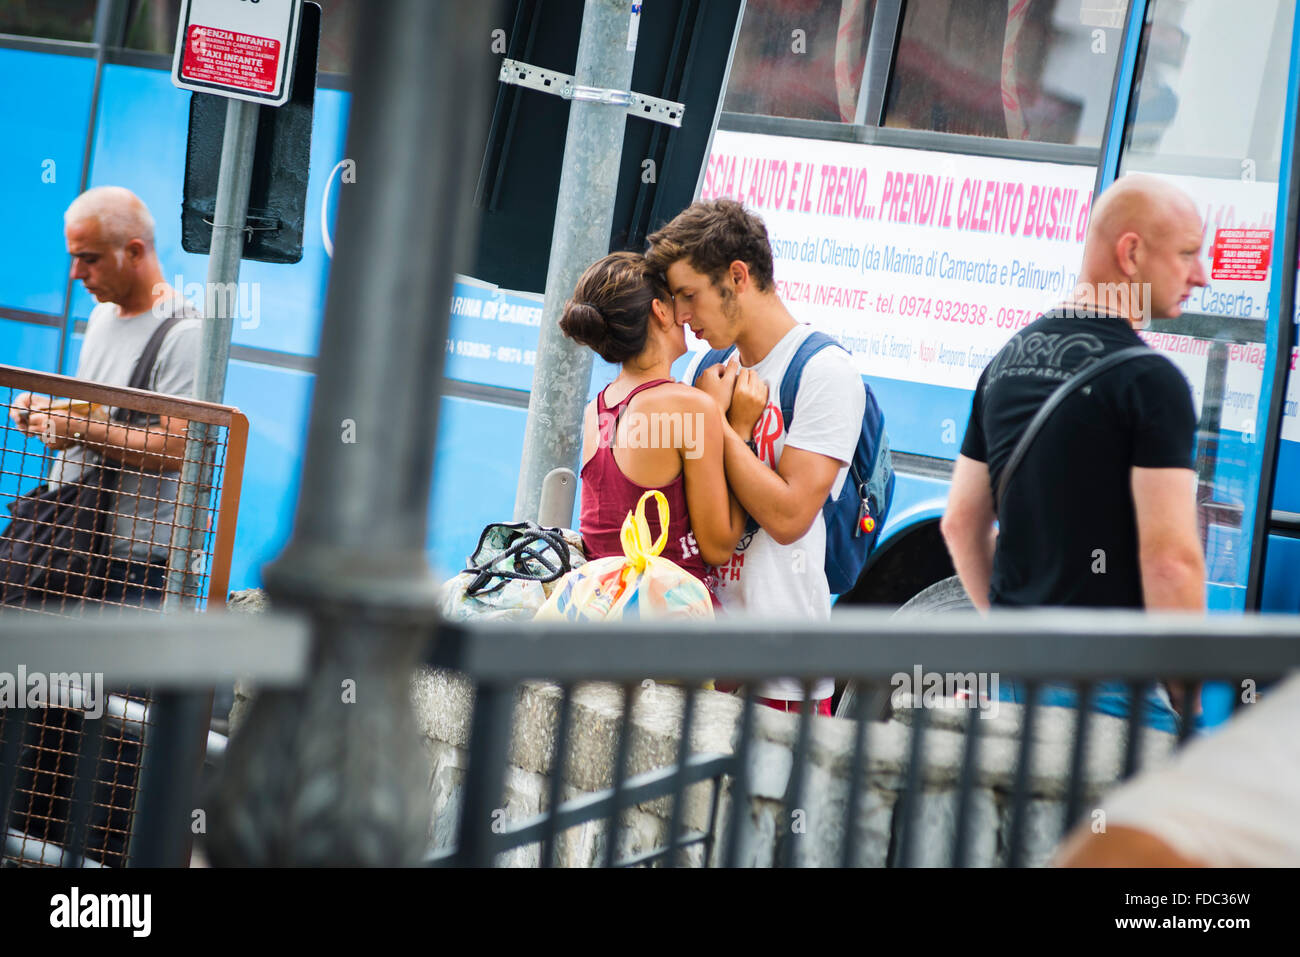 Young couple takes an affectionate farewell snuggling at the bus stop in Marina di Camerota,Campania,Italy Stock Photo